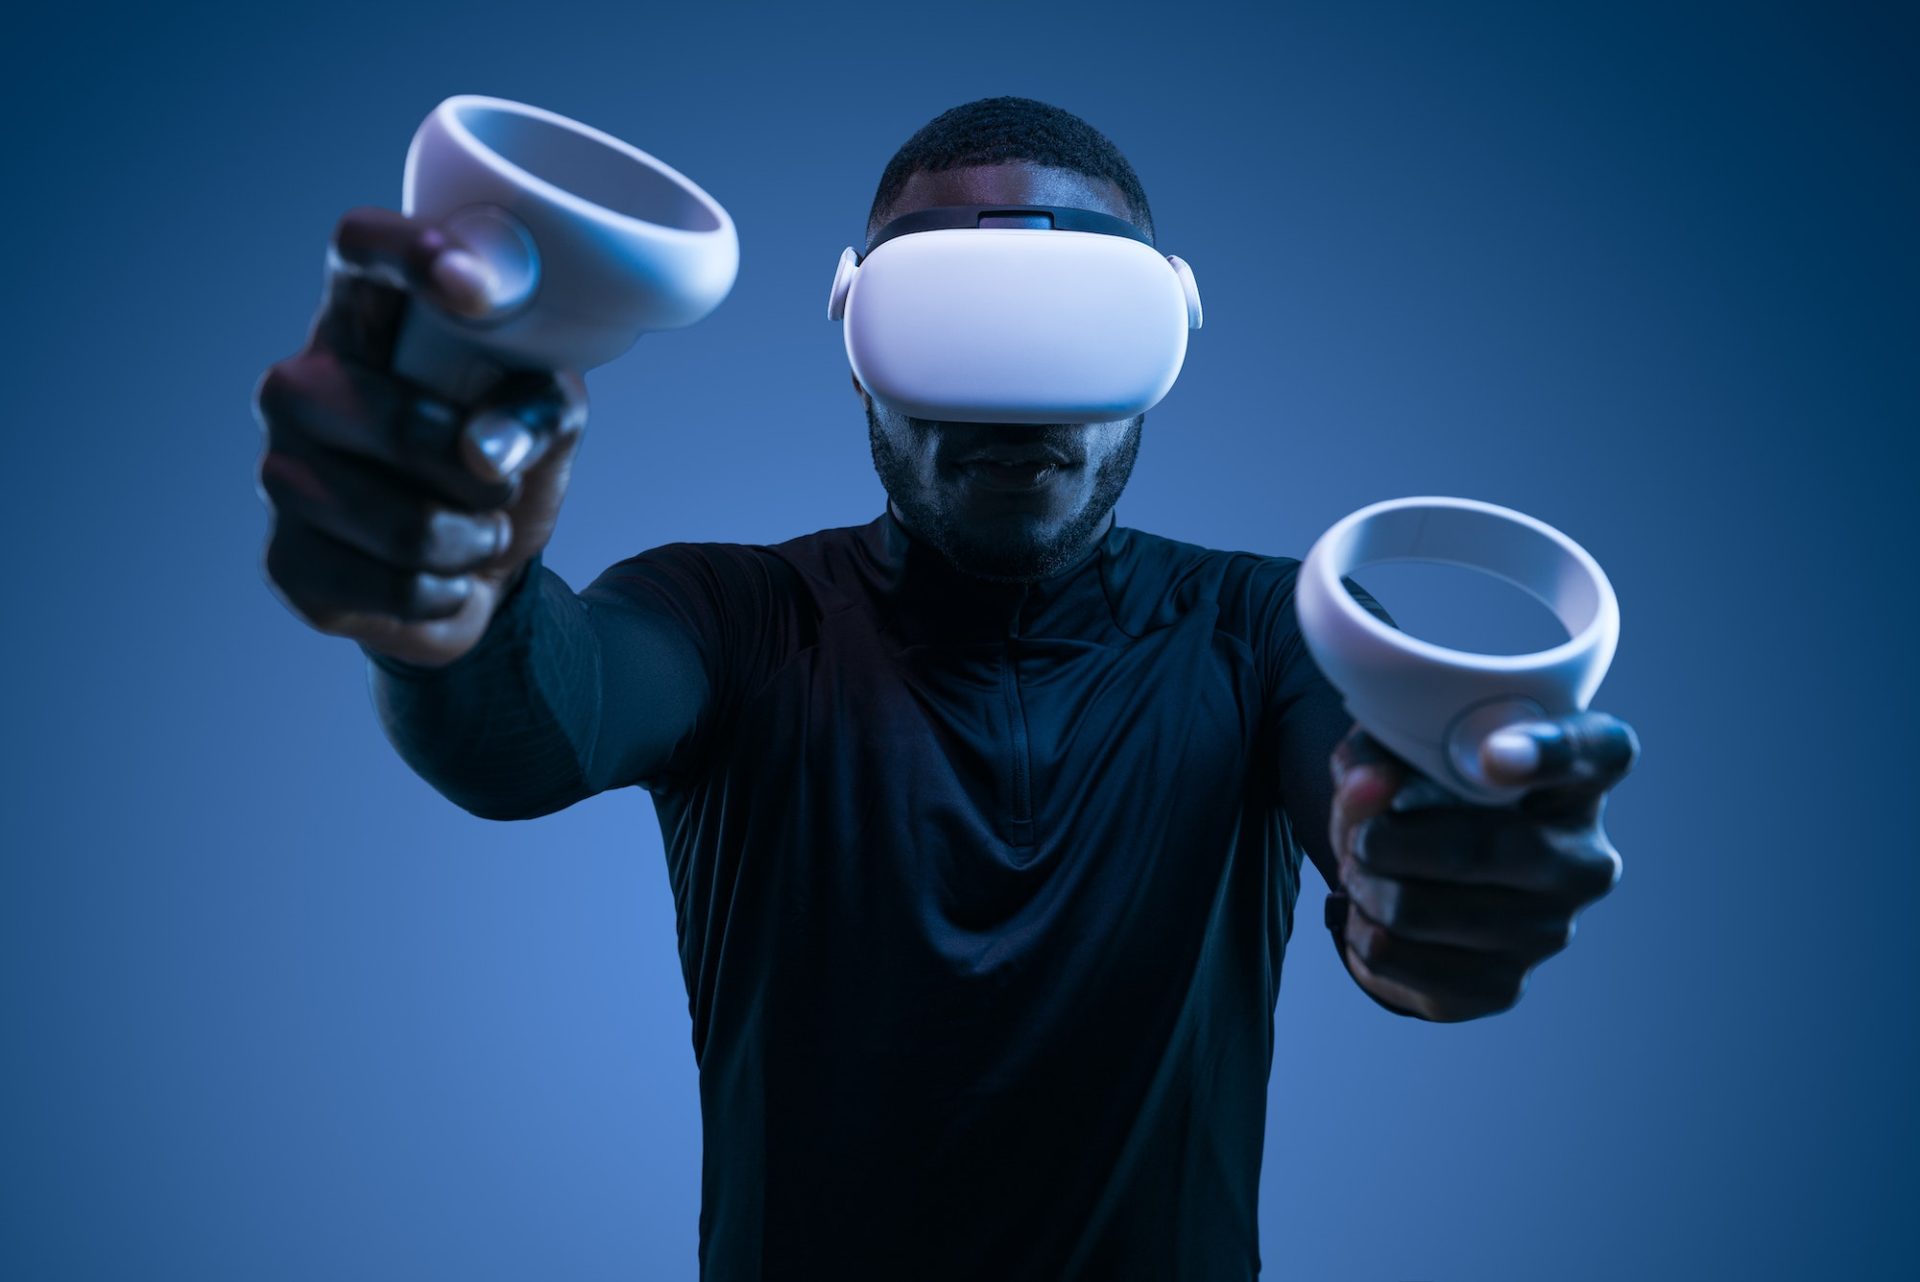 Focused black man playing video game with joysticks in VR goggles